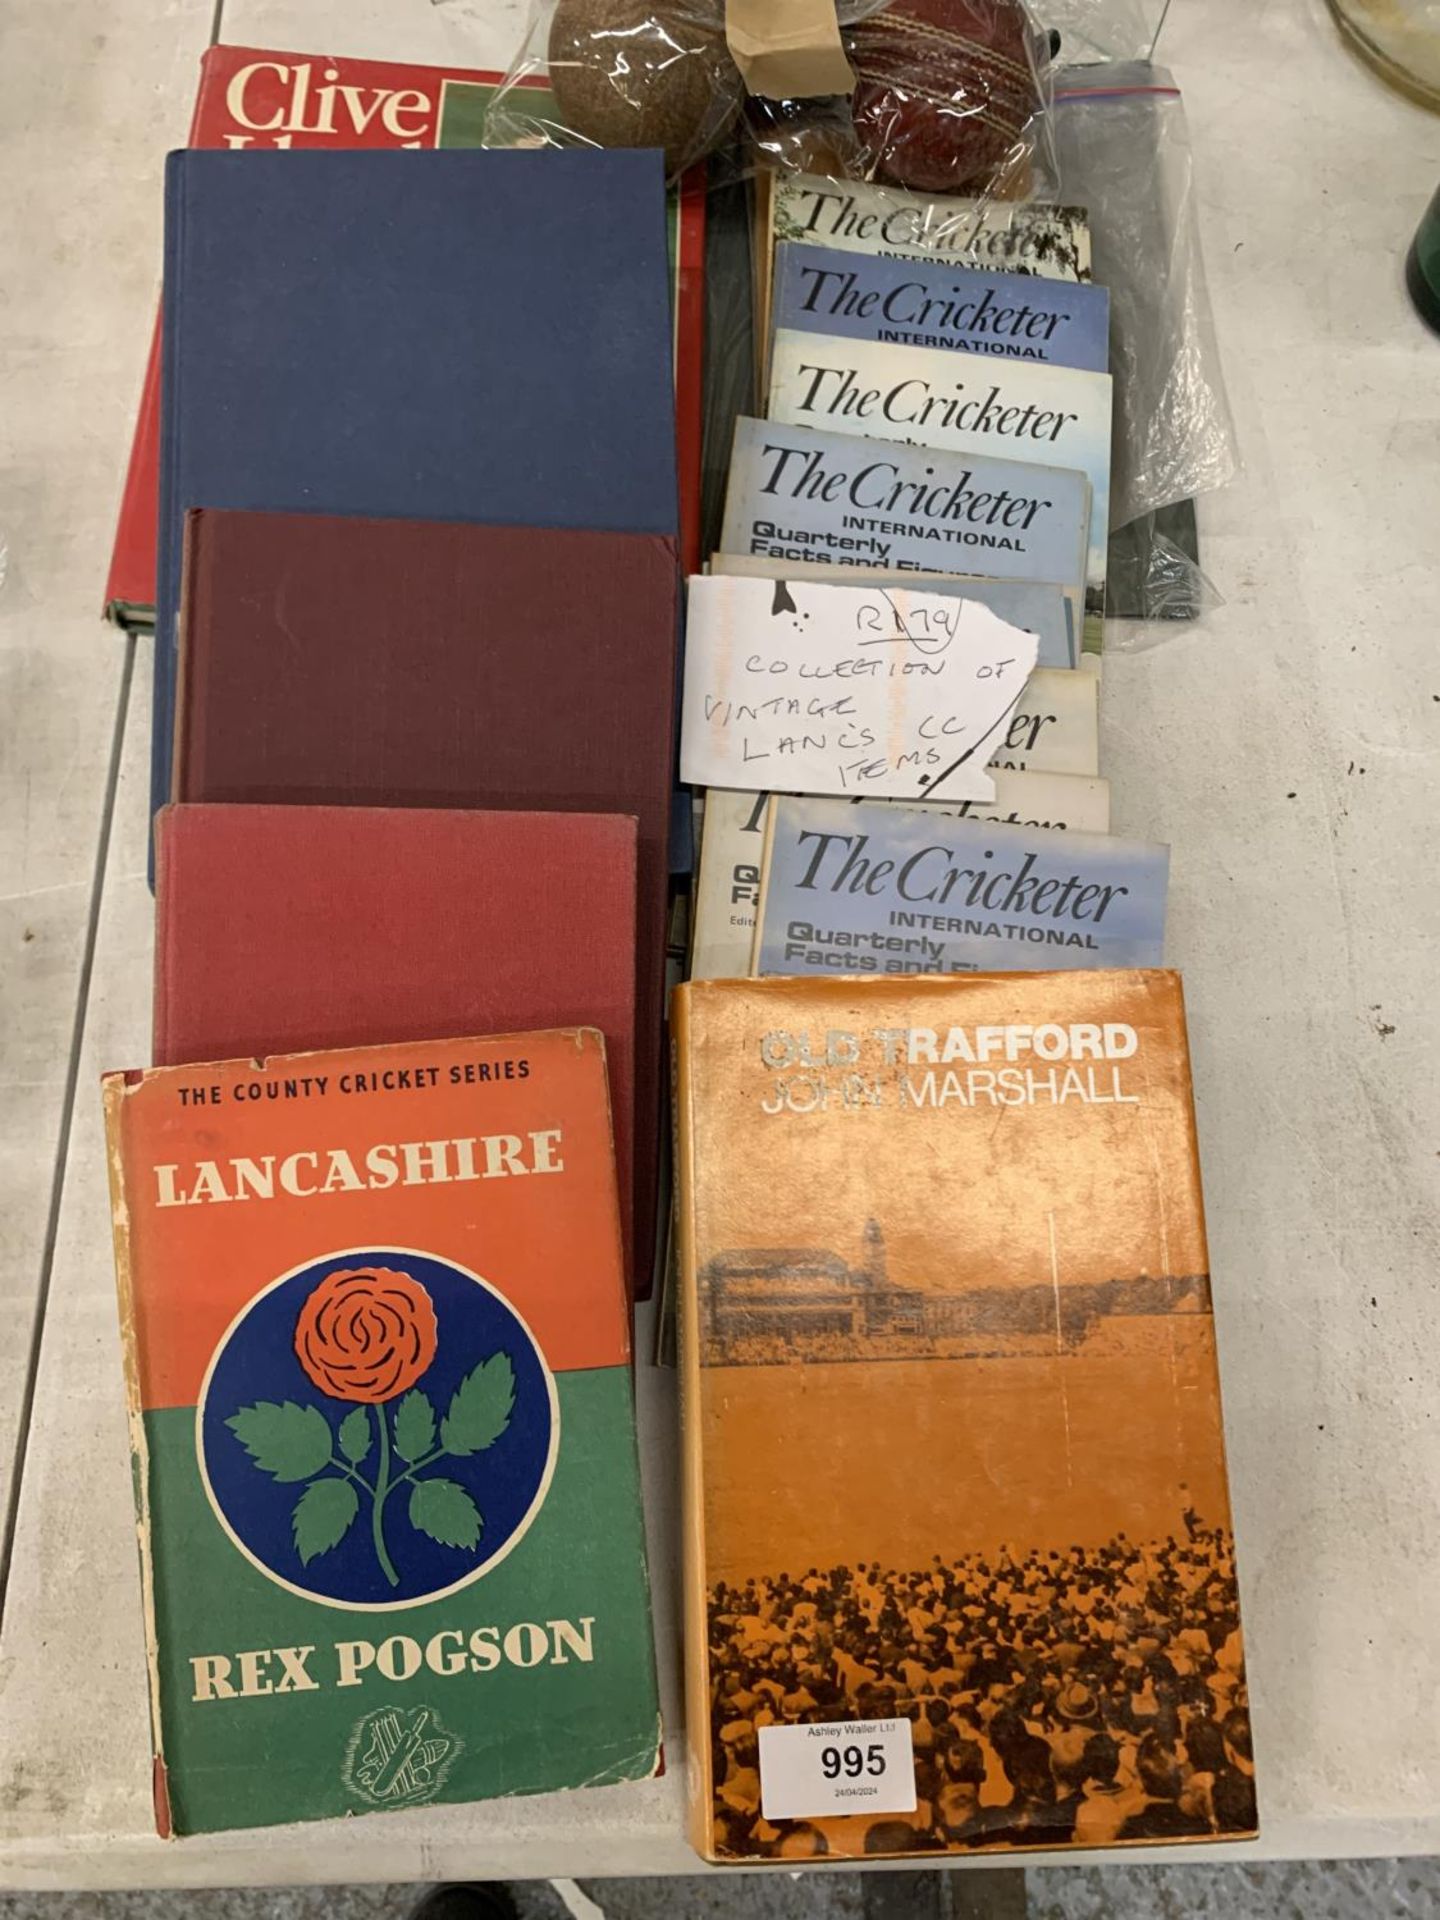 A COLLECTION OF VINTAGE LANCASHIRE CRICKET CLUB ITEMS TO INCLUDE BOOKS, A SIGNED 1948 PHOTO AND - Image 3 of 3